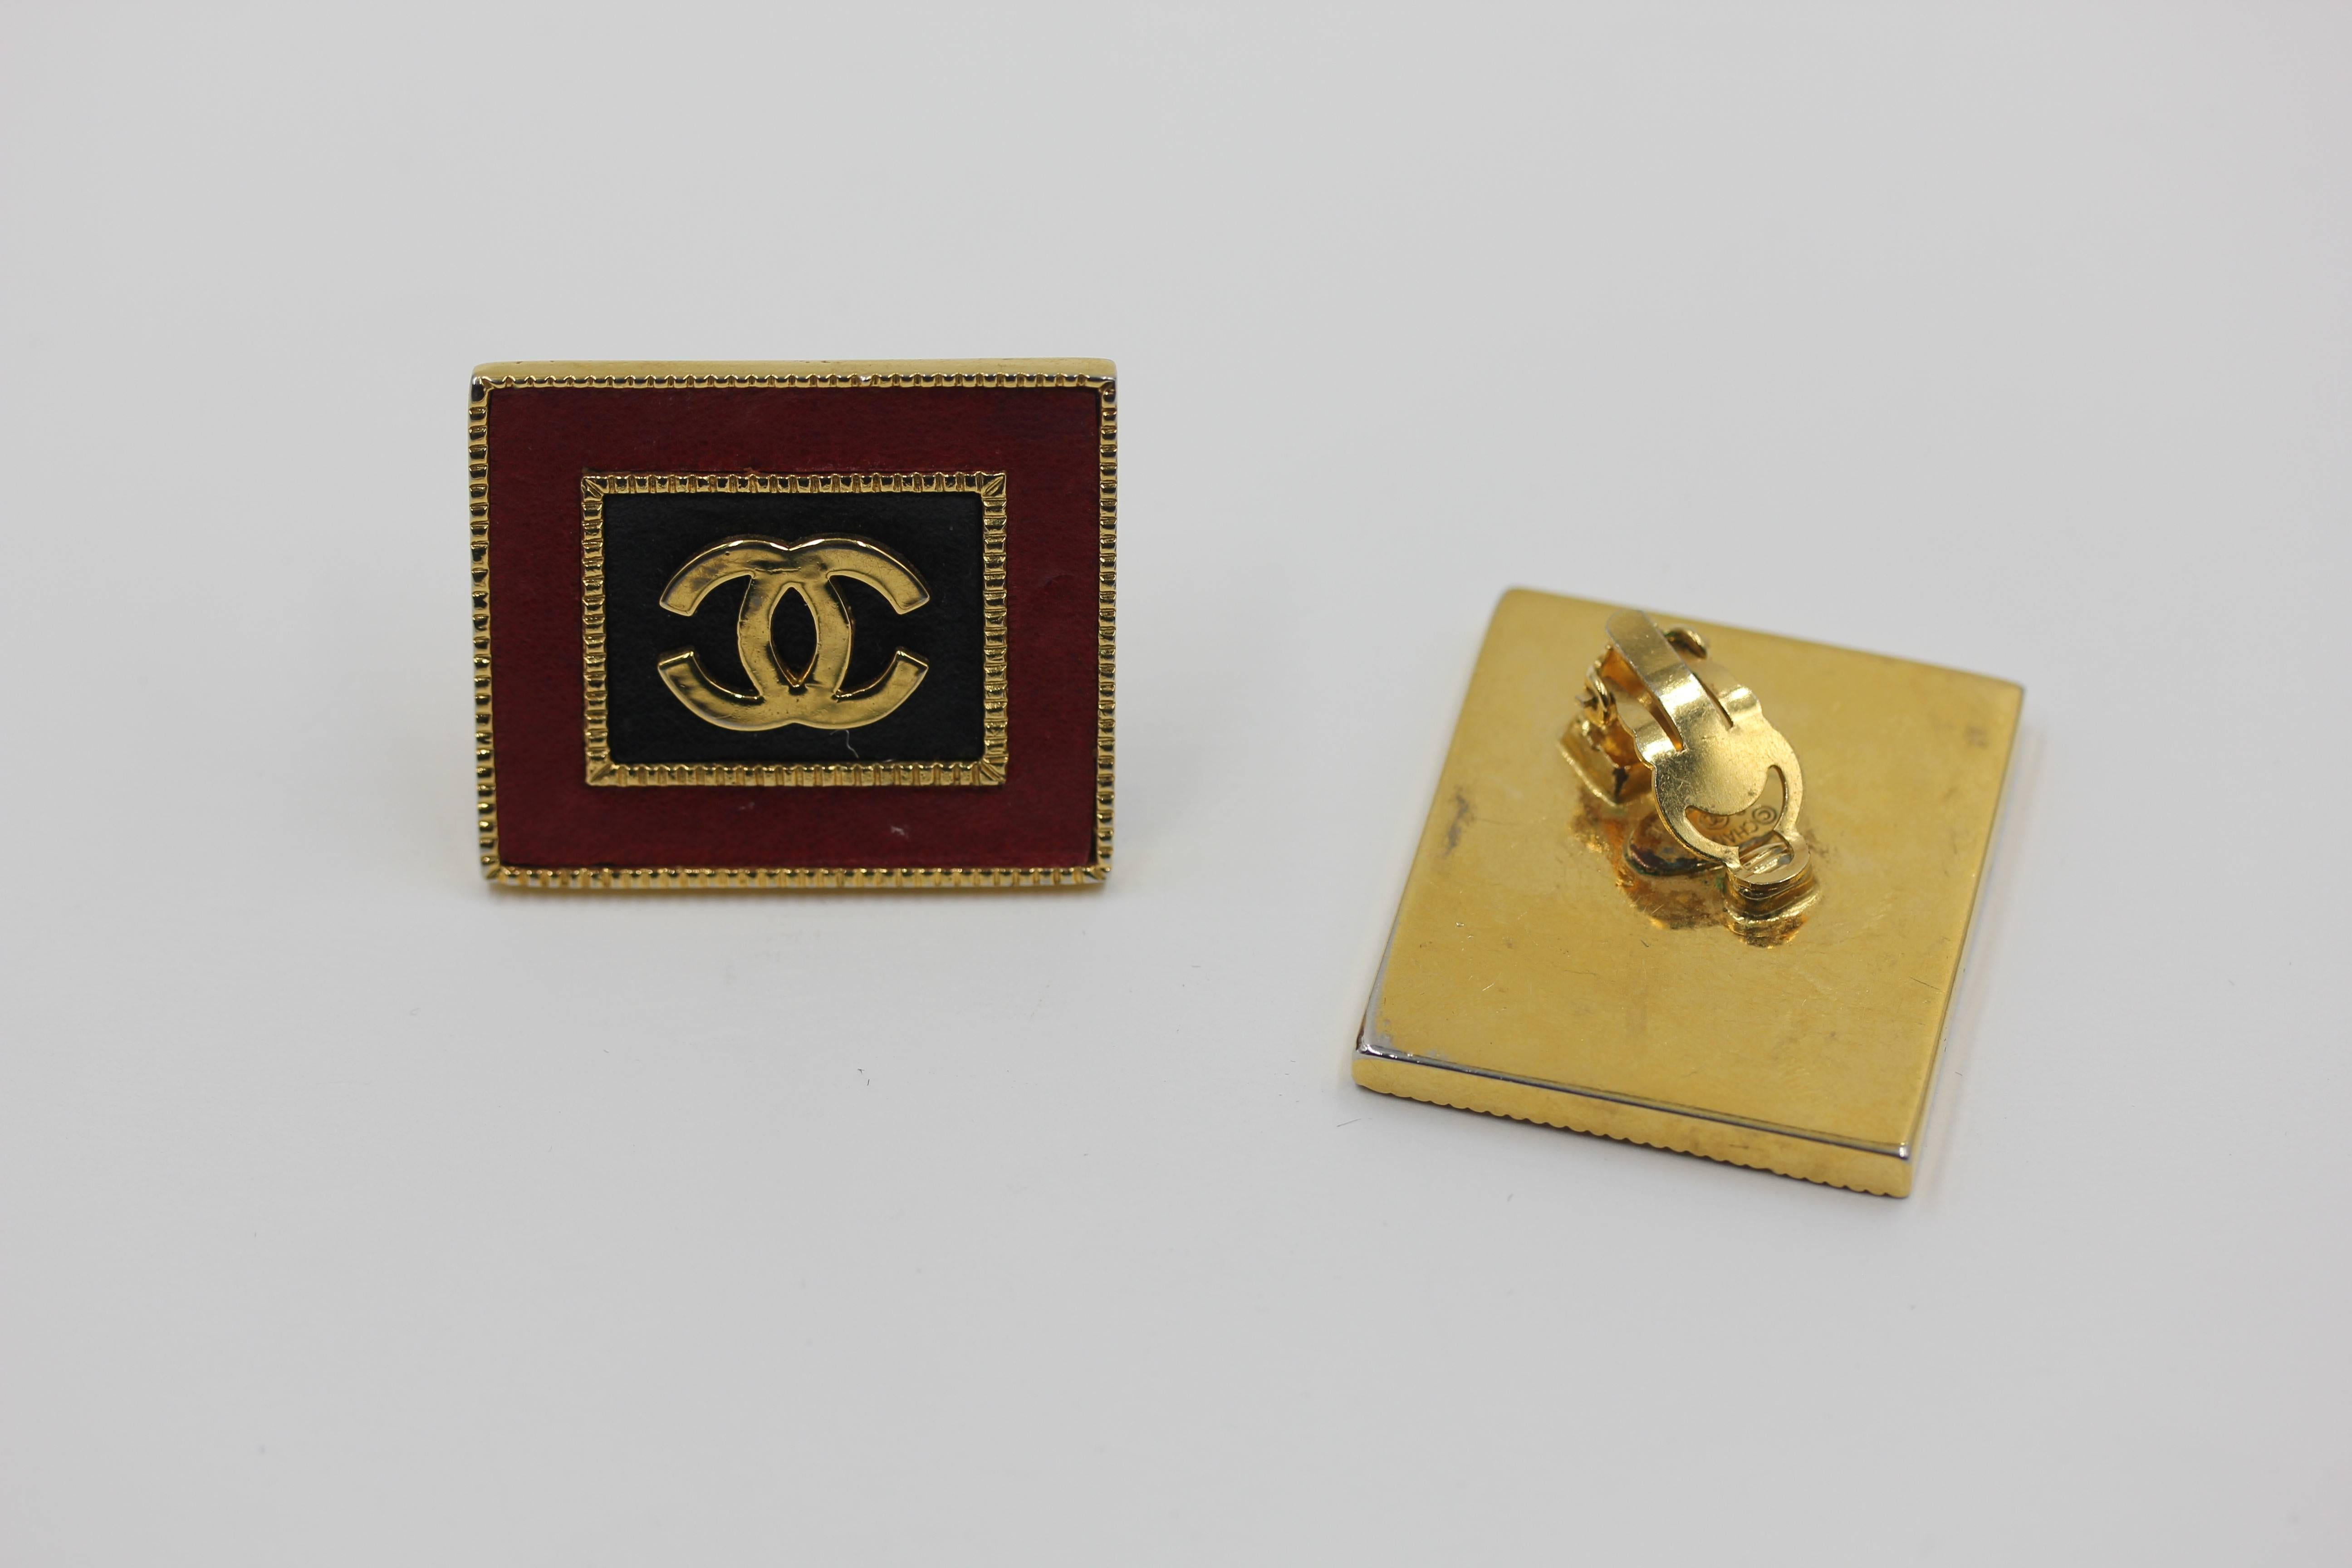 VINTAGE RARE Chanel Gold Tone Red Black Leather 'CC' Square Clip On Earrings . Vintage Chanel earrings from Collection 26, circa 1989. This very rare design emulates the exaggerated style of the 80's. . Square shape sits at an angle on the ear lobe.